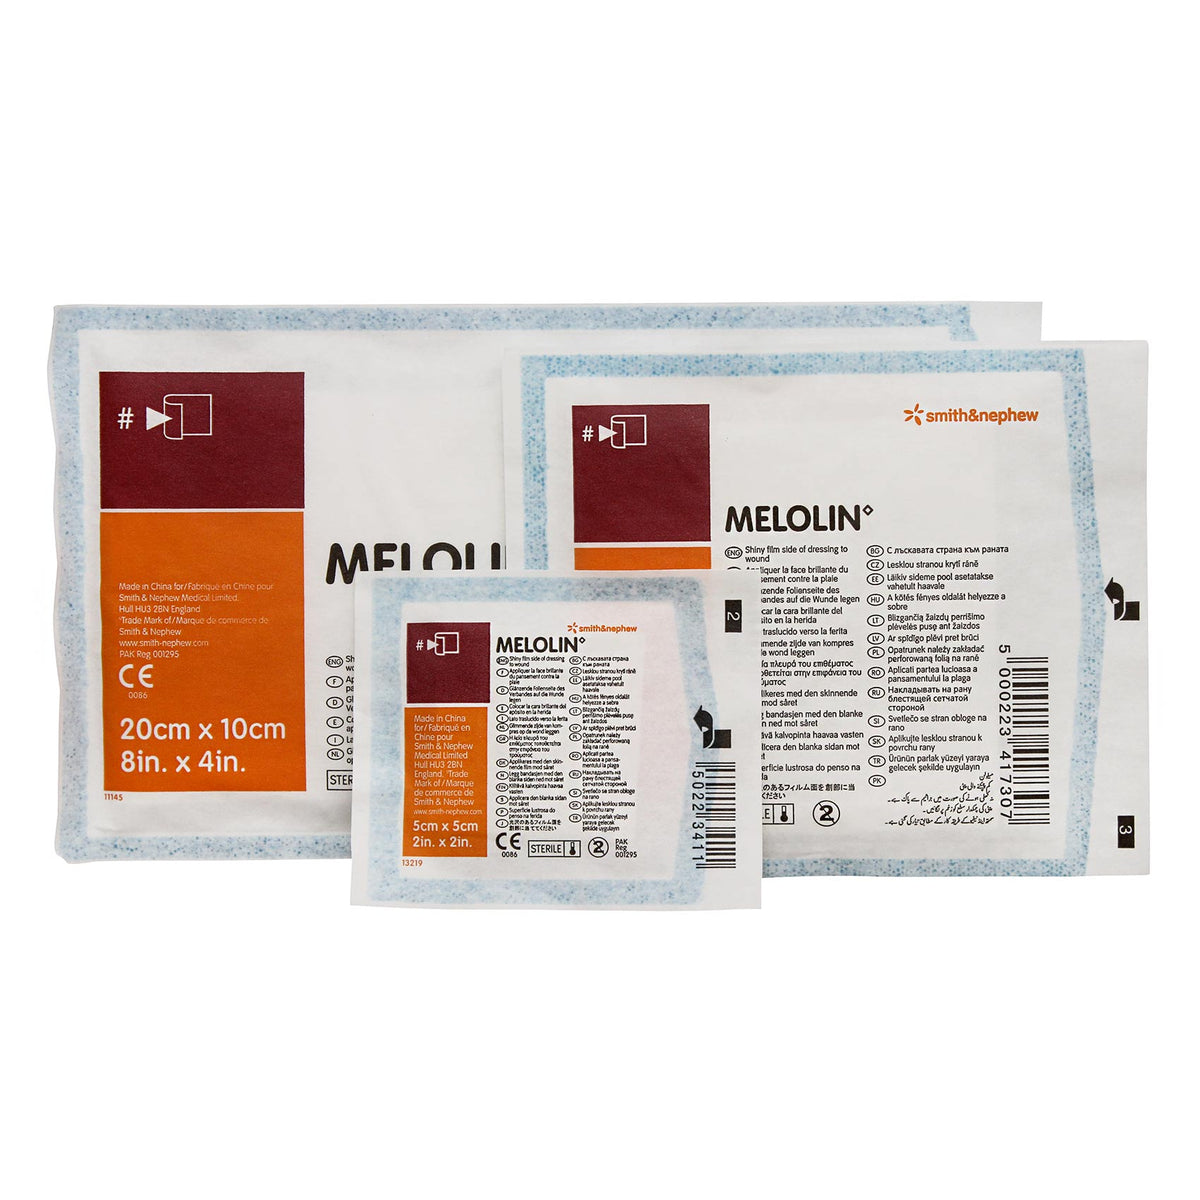 Melolin Low Adherent Wound Dressing (Highly Absorbent) - Single